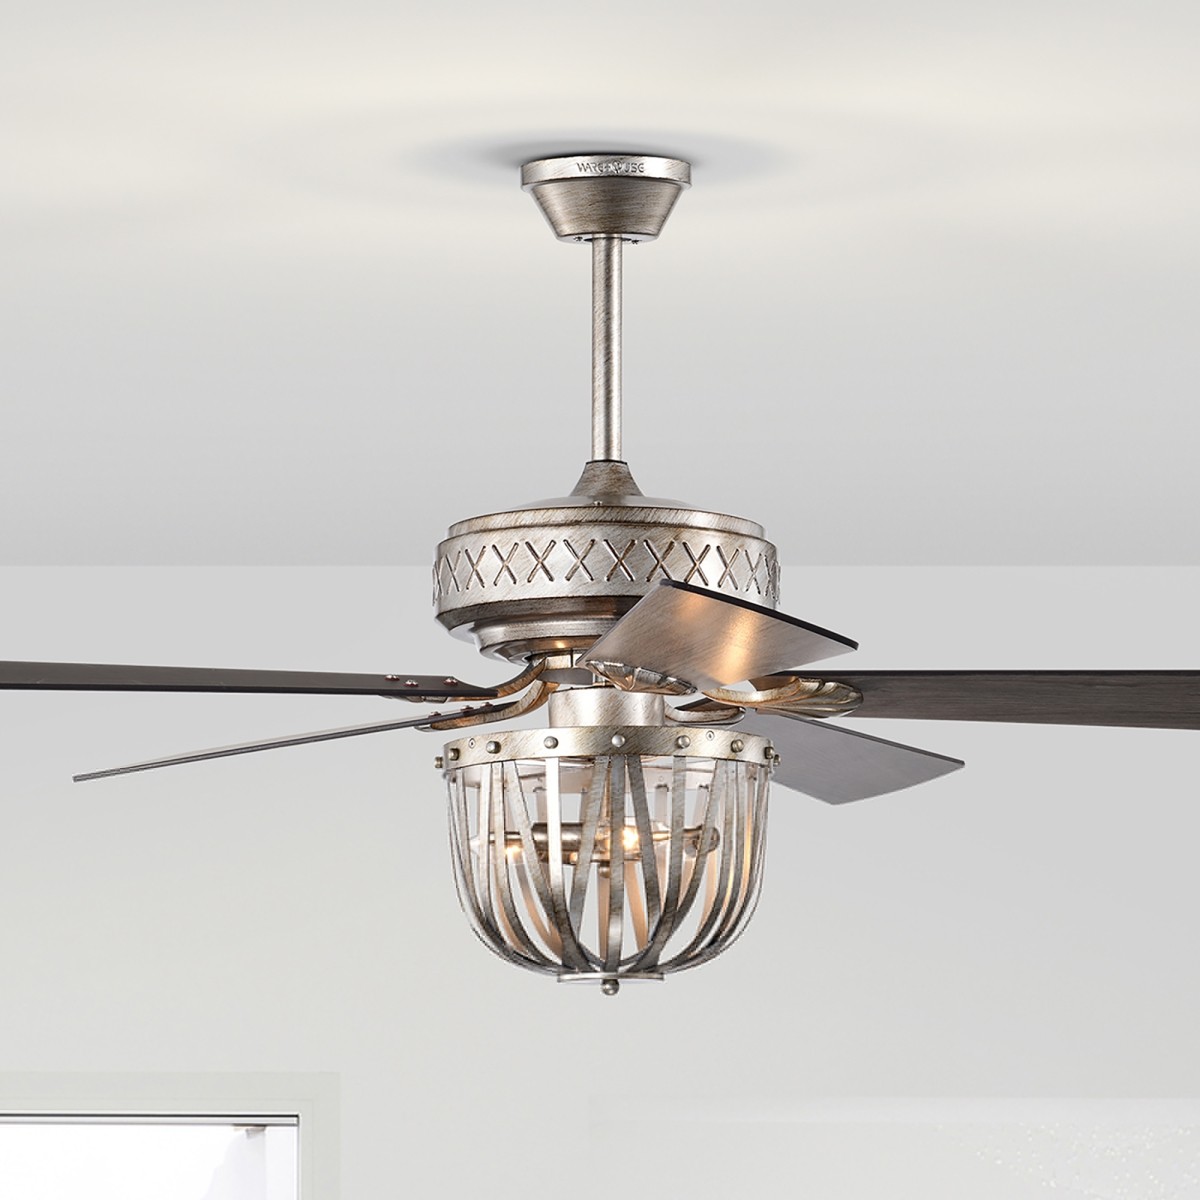 Emani 52 in. 3-Light Indoor Antique Silver Finish Ceiling Fan with Light Kit and Remote